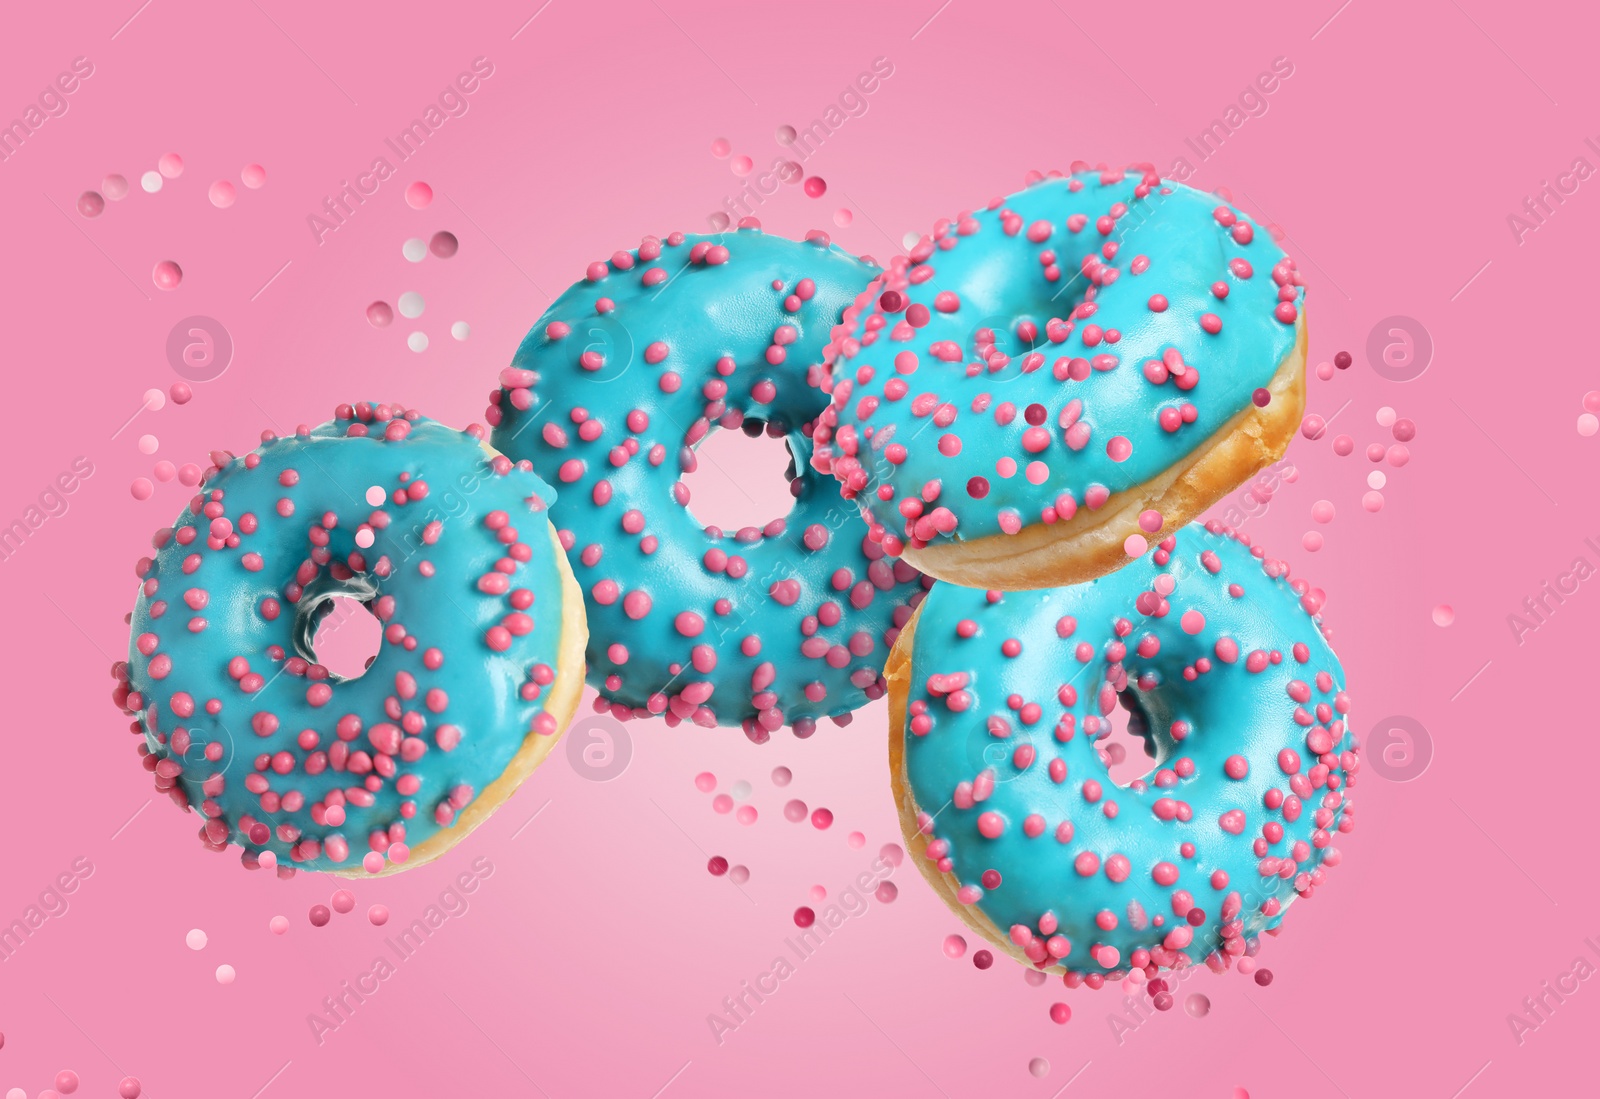 Image of Set of falling delicious donuts on pink background